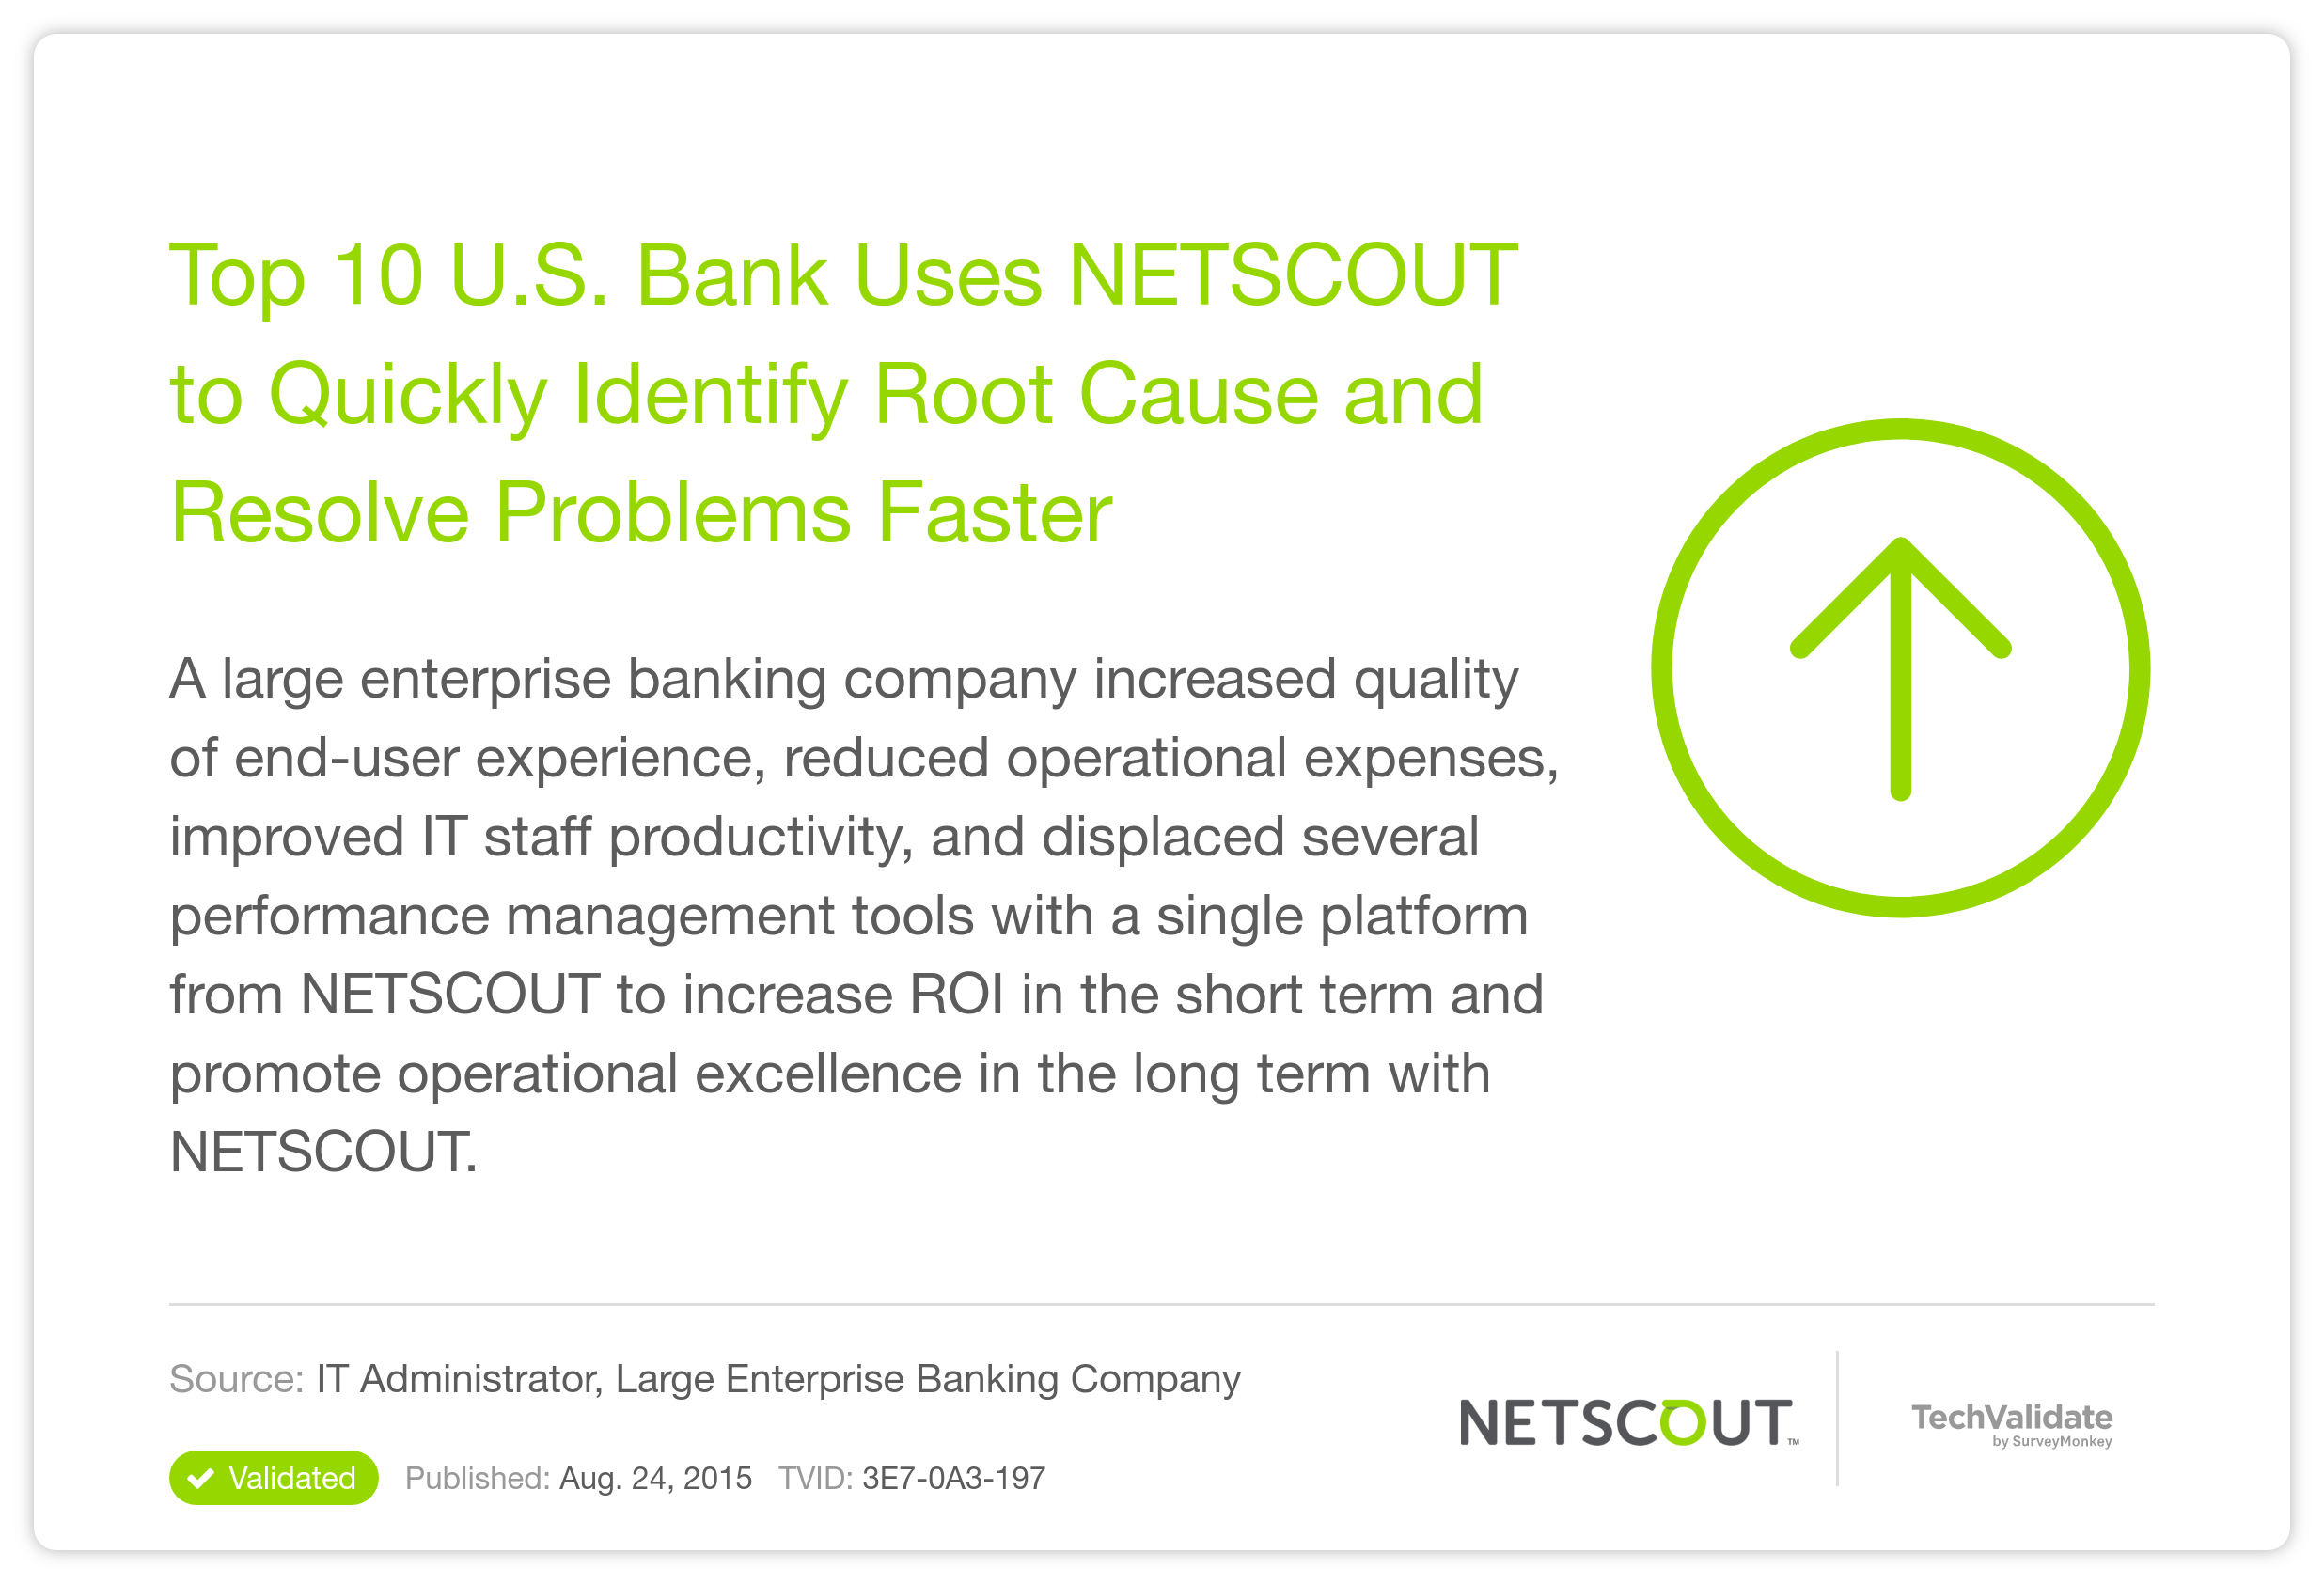 Top 10 U.S. Bank Uses NETSCOUT to Quickly Identify Root Cause and Resolve Problems Faster